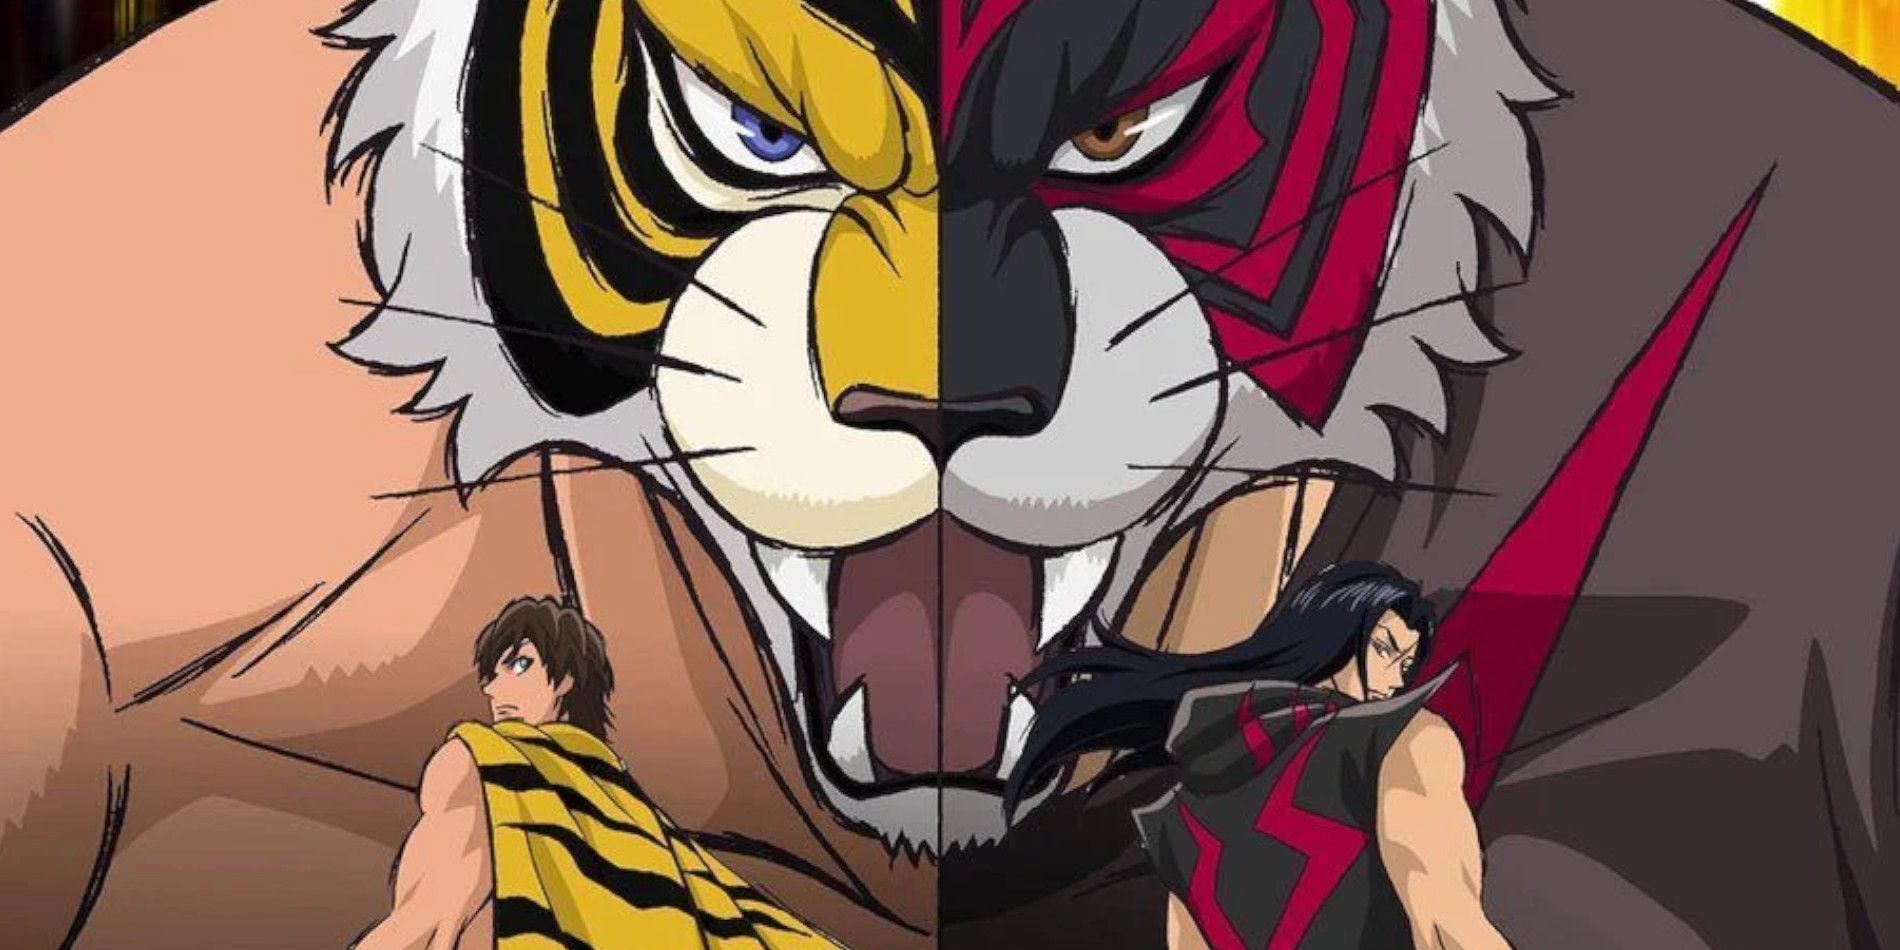 Premium Photo | Anime Tiger Sitting By The Road Studio Ghibli Style Cover  Art